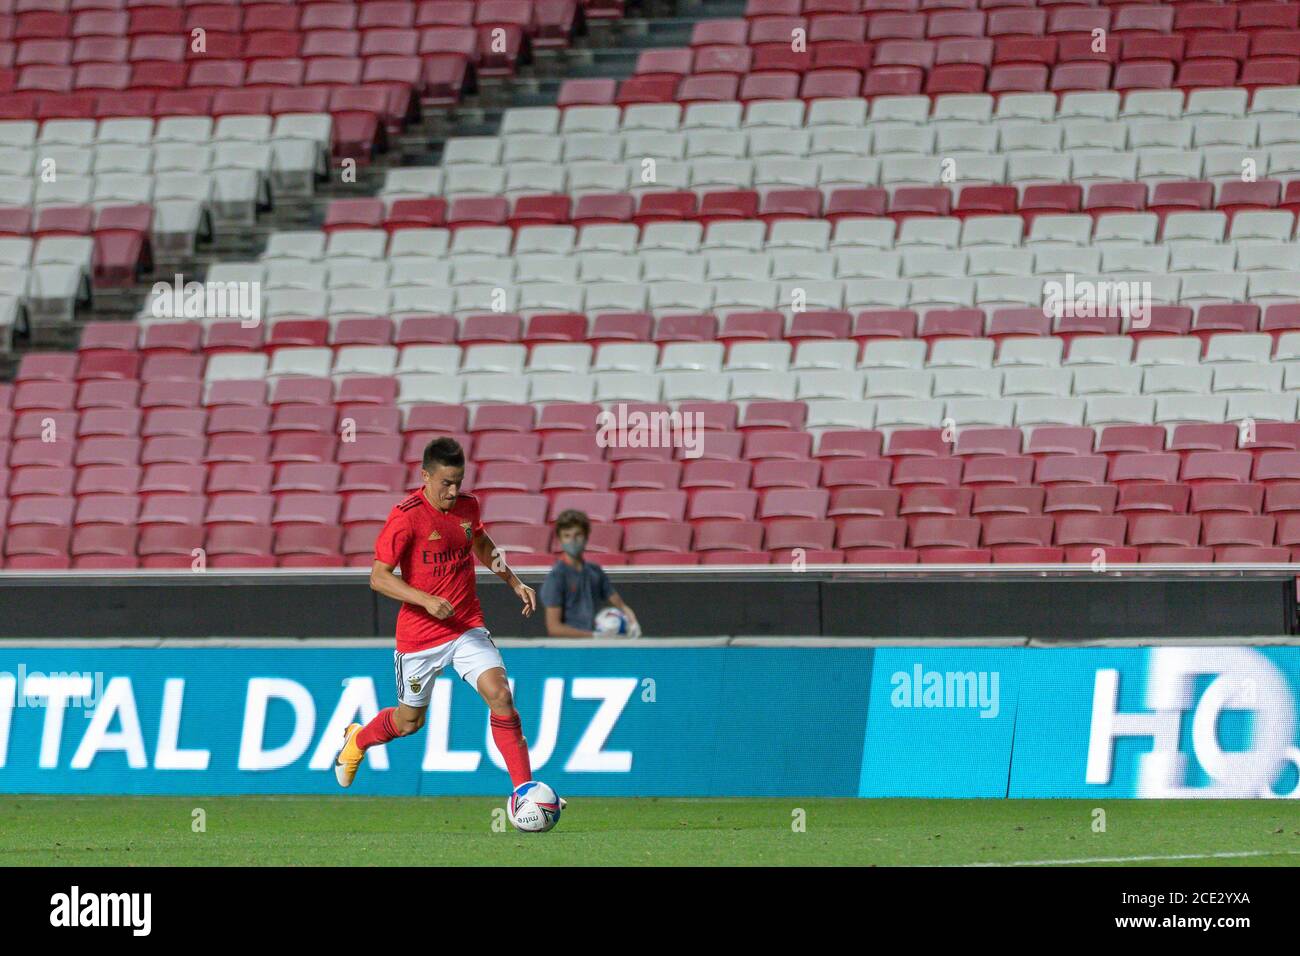 Lisbon, Portugal. August 30, 2020. Lisbon, Portugal. Benfica's midfielder from Argentina Franco Cervi (11) in action during the friendly game between SL Benfica vs AFC Bournemouth © Alexandre de Sousa/Alamy Live News Stock Photo